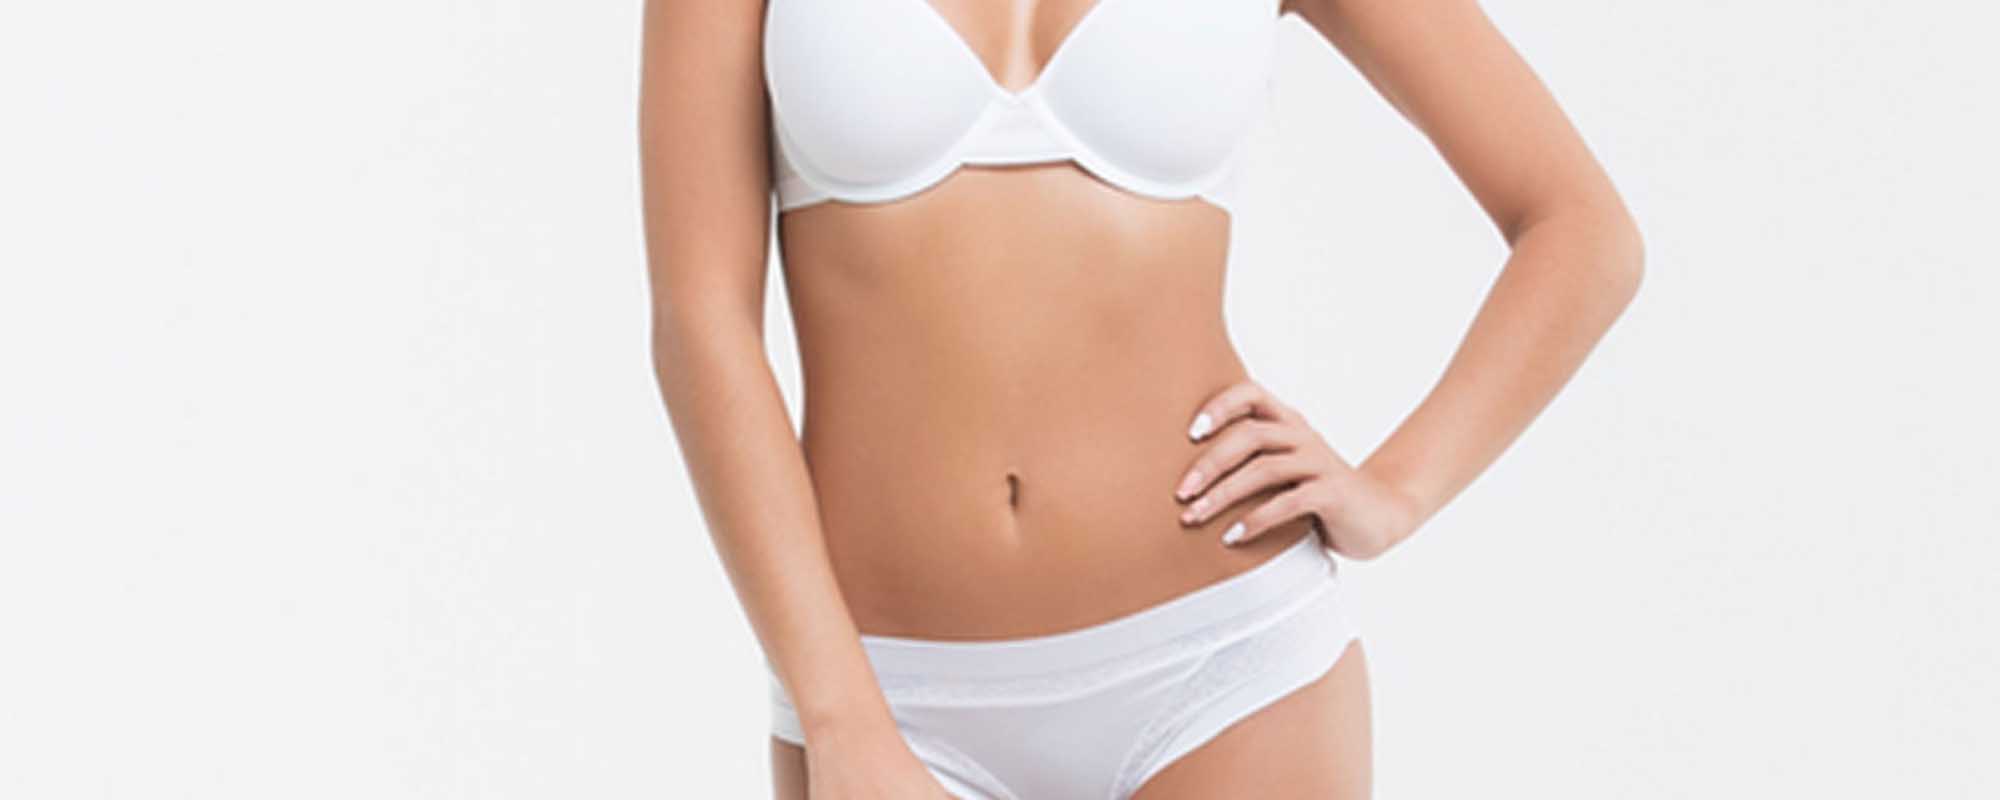 Top 15 FAQs about Liposuction Surgery, Liposuction Procedure & Weight Loss